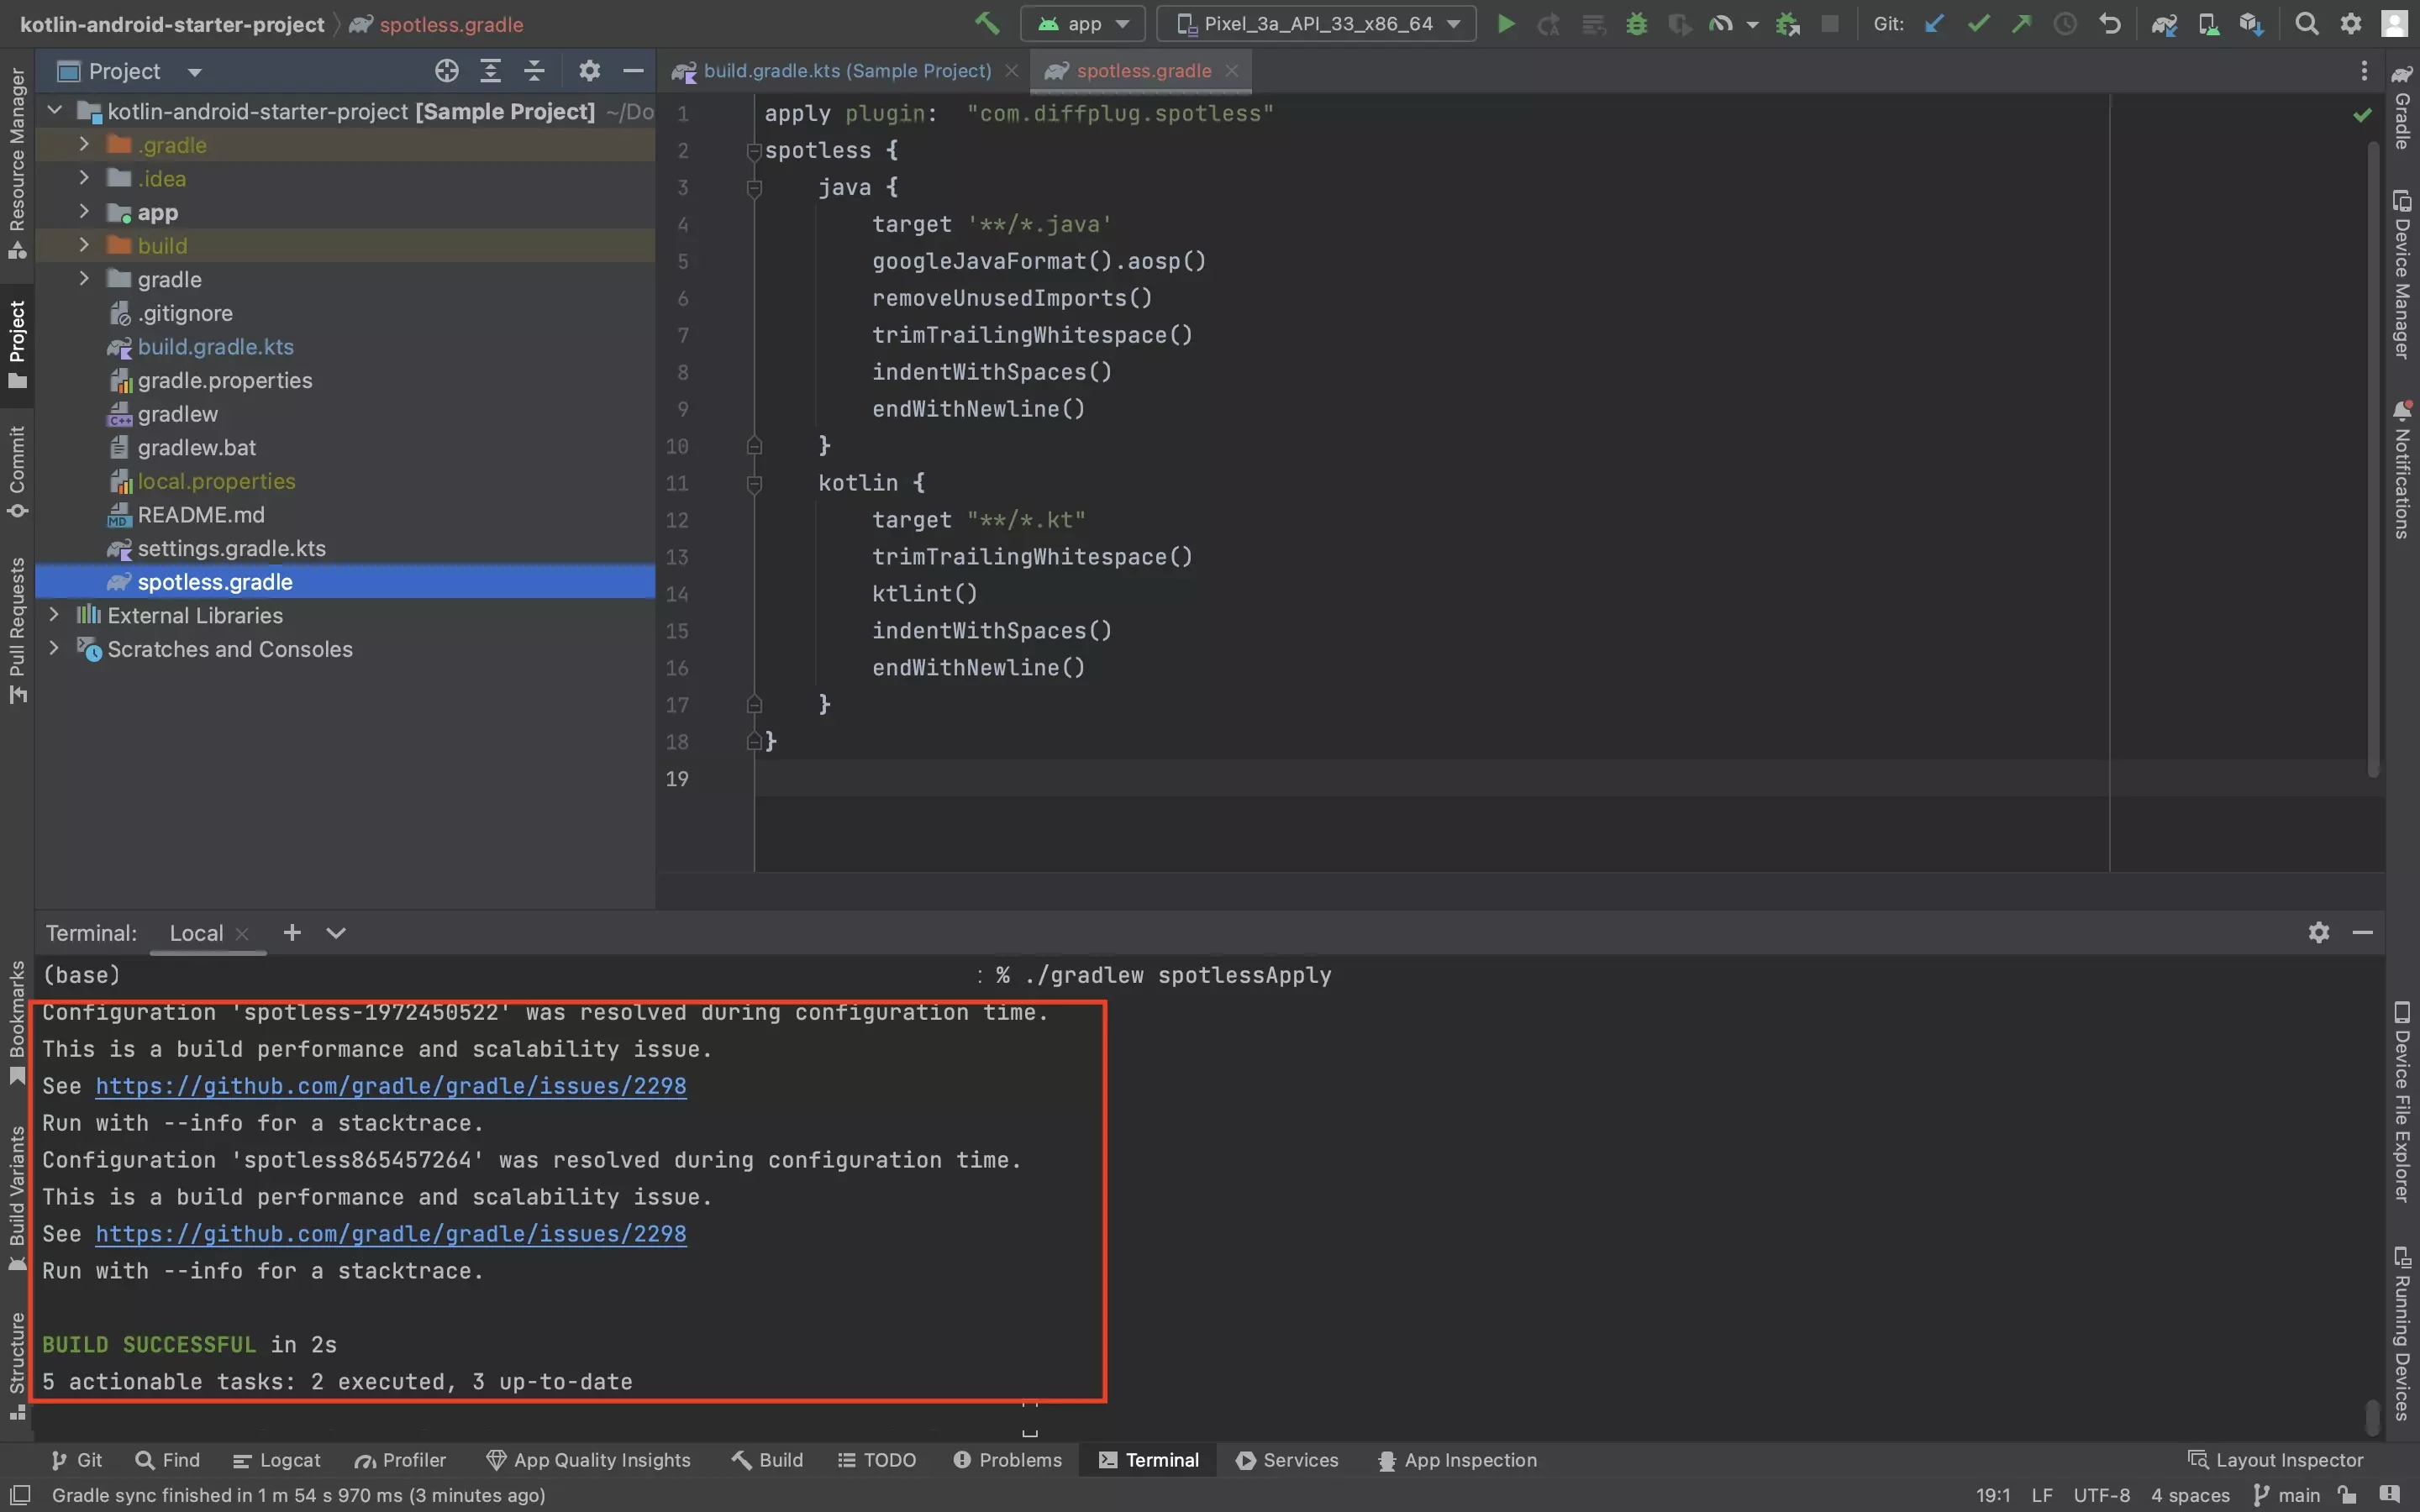 A screenshot of Android Studio with the Terminal open, showing that the test of the Spotless check succeeded.